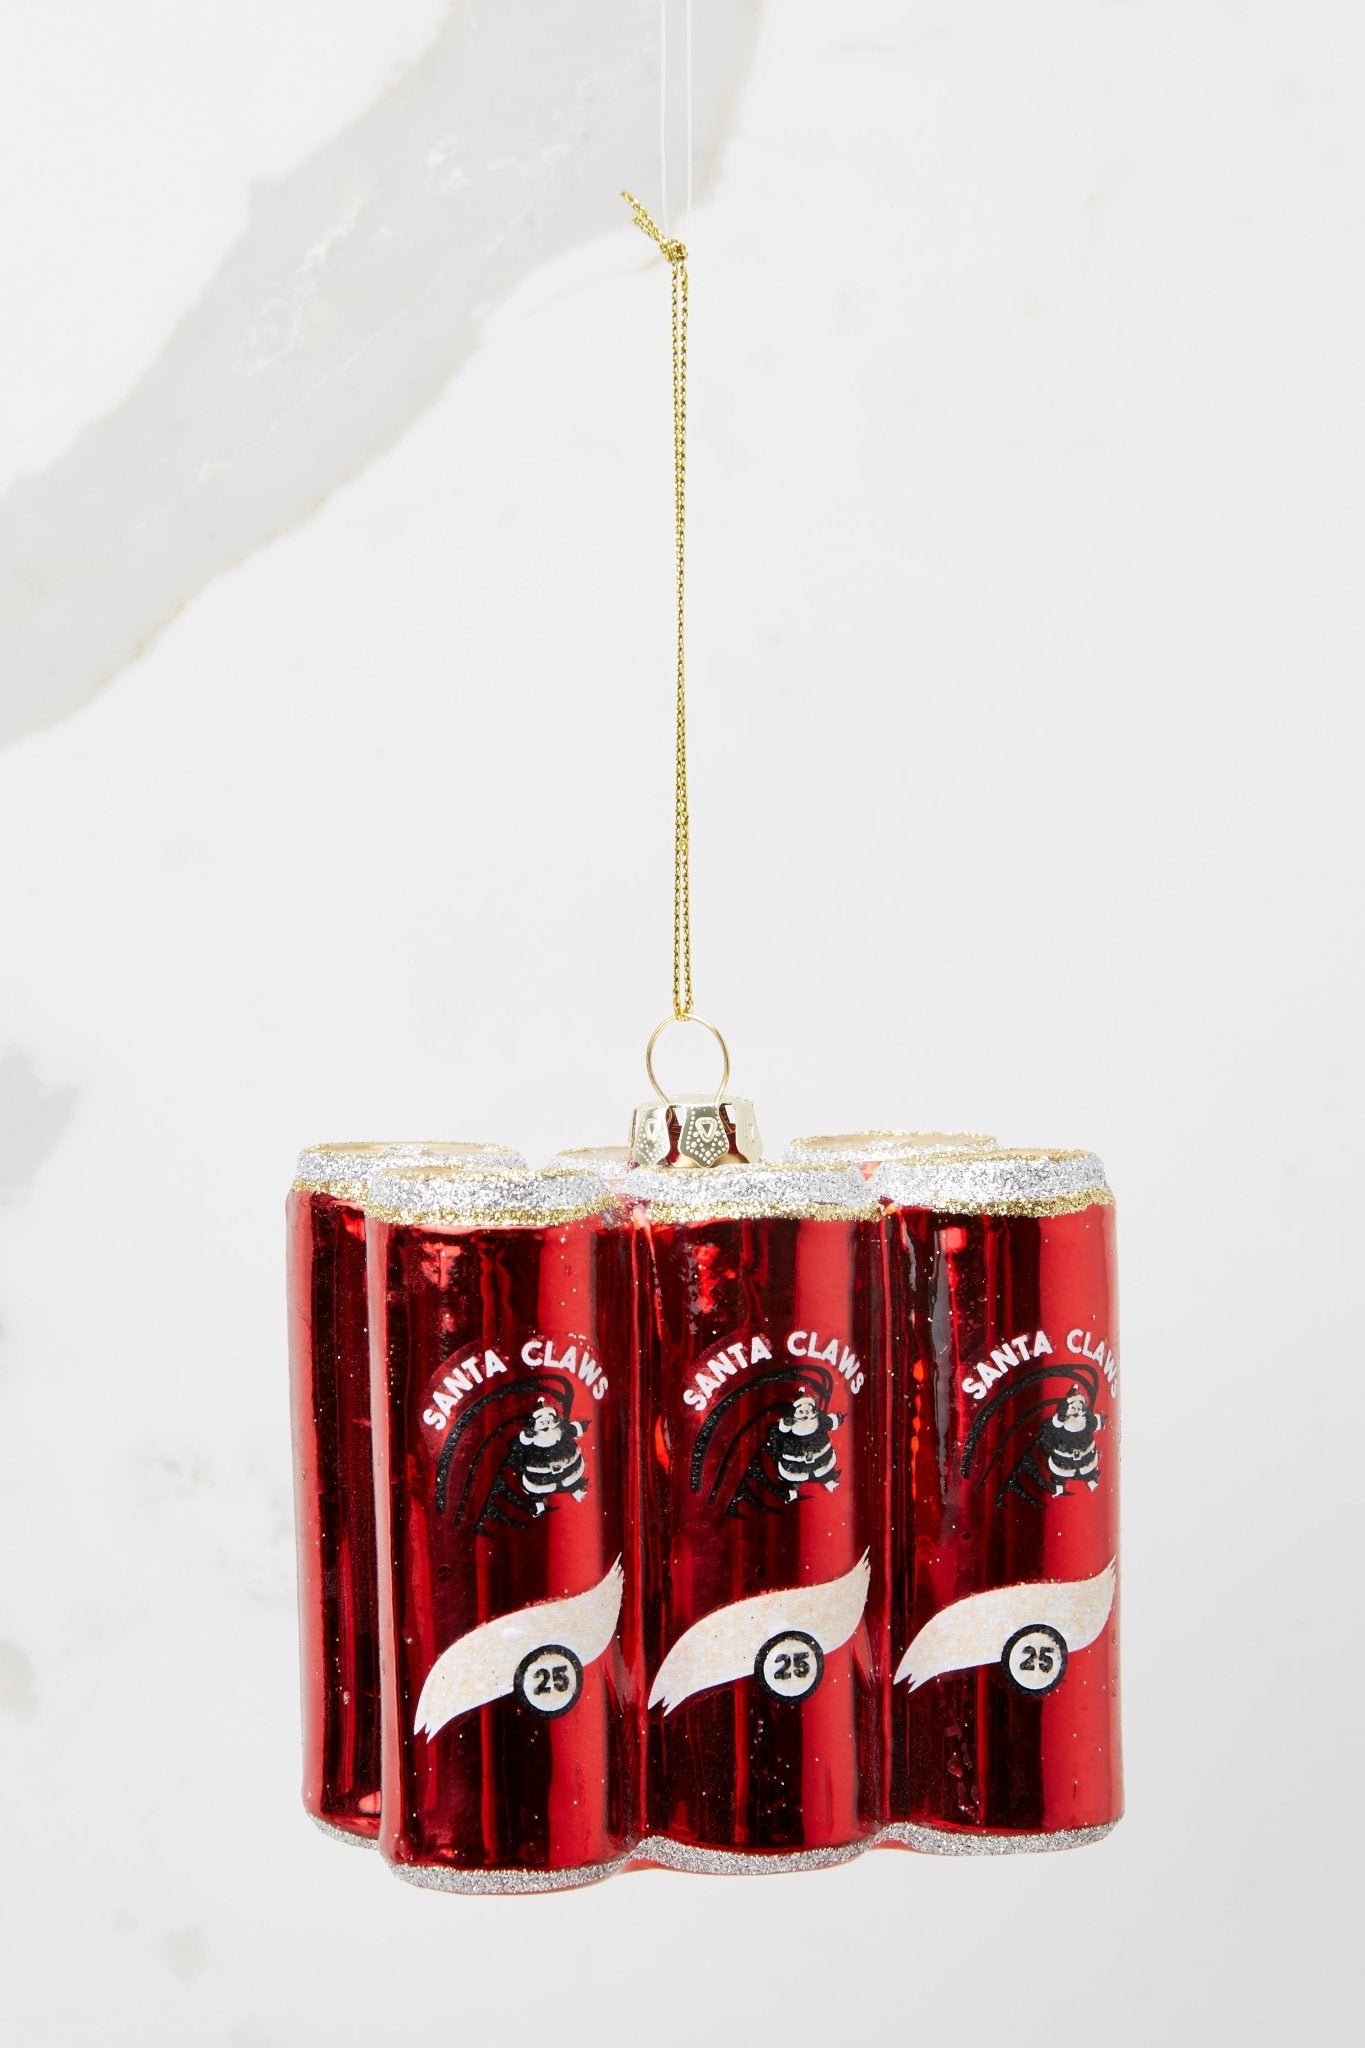 This red ornament features six red cans with white and gold accents and glitter detailing.